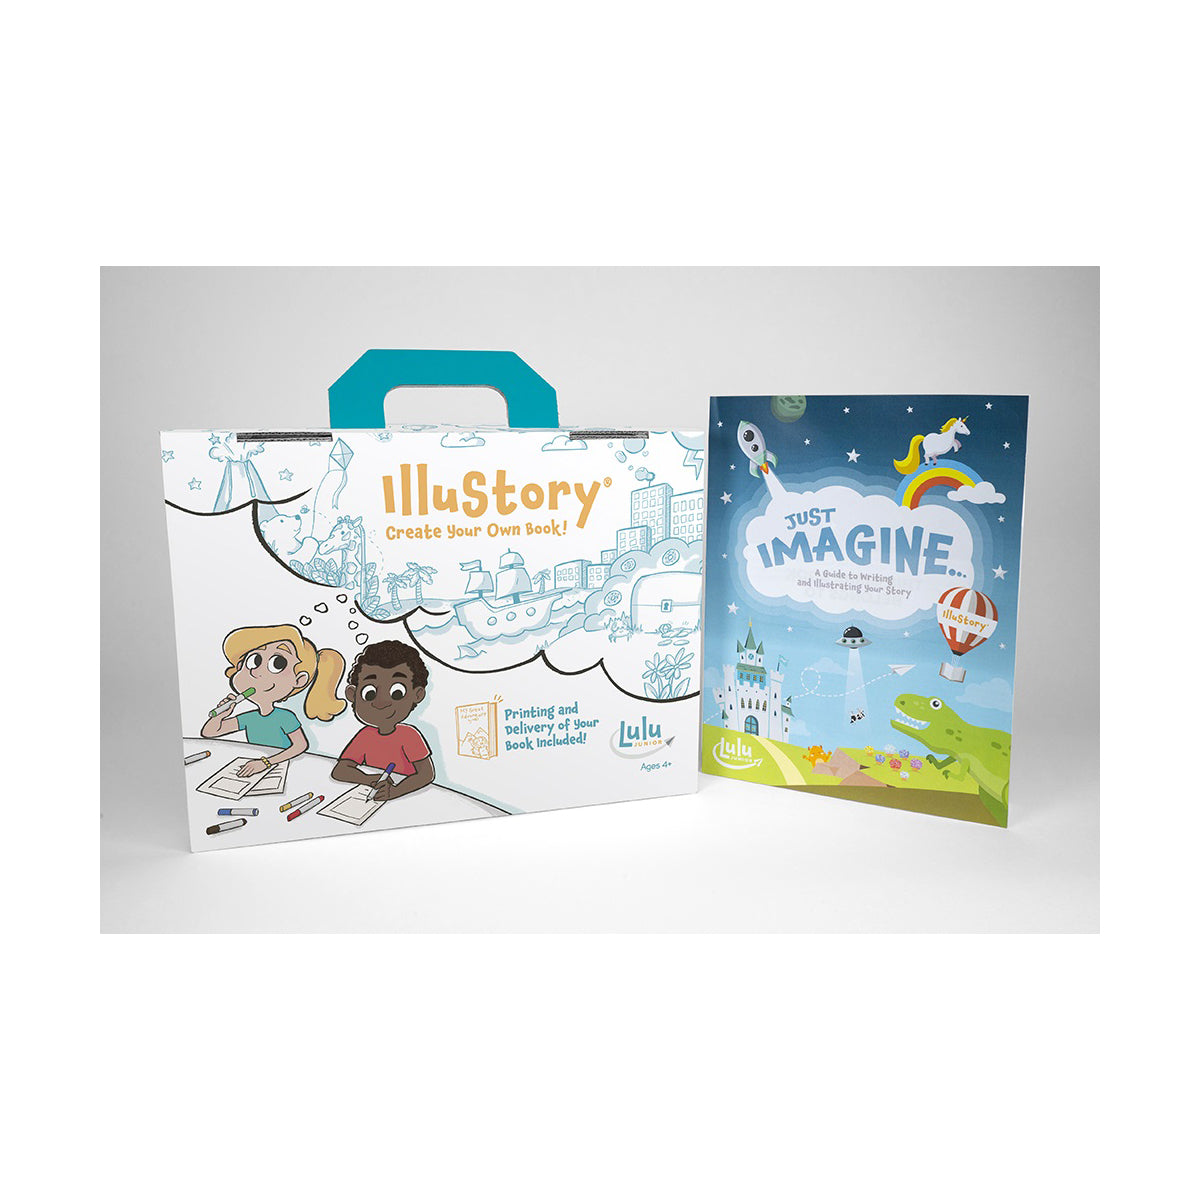 Lulu Jr. New Release IlluStory Junior kit turns your child into an